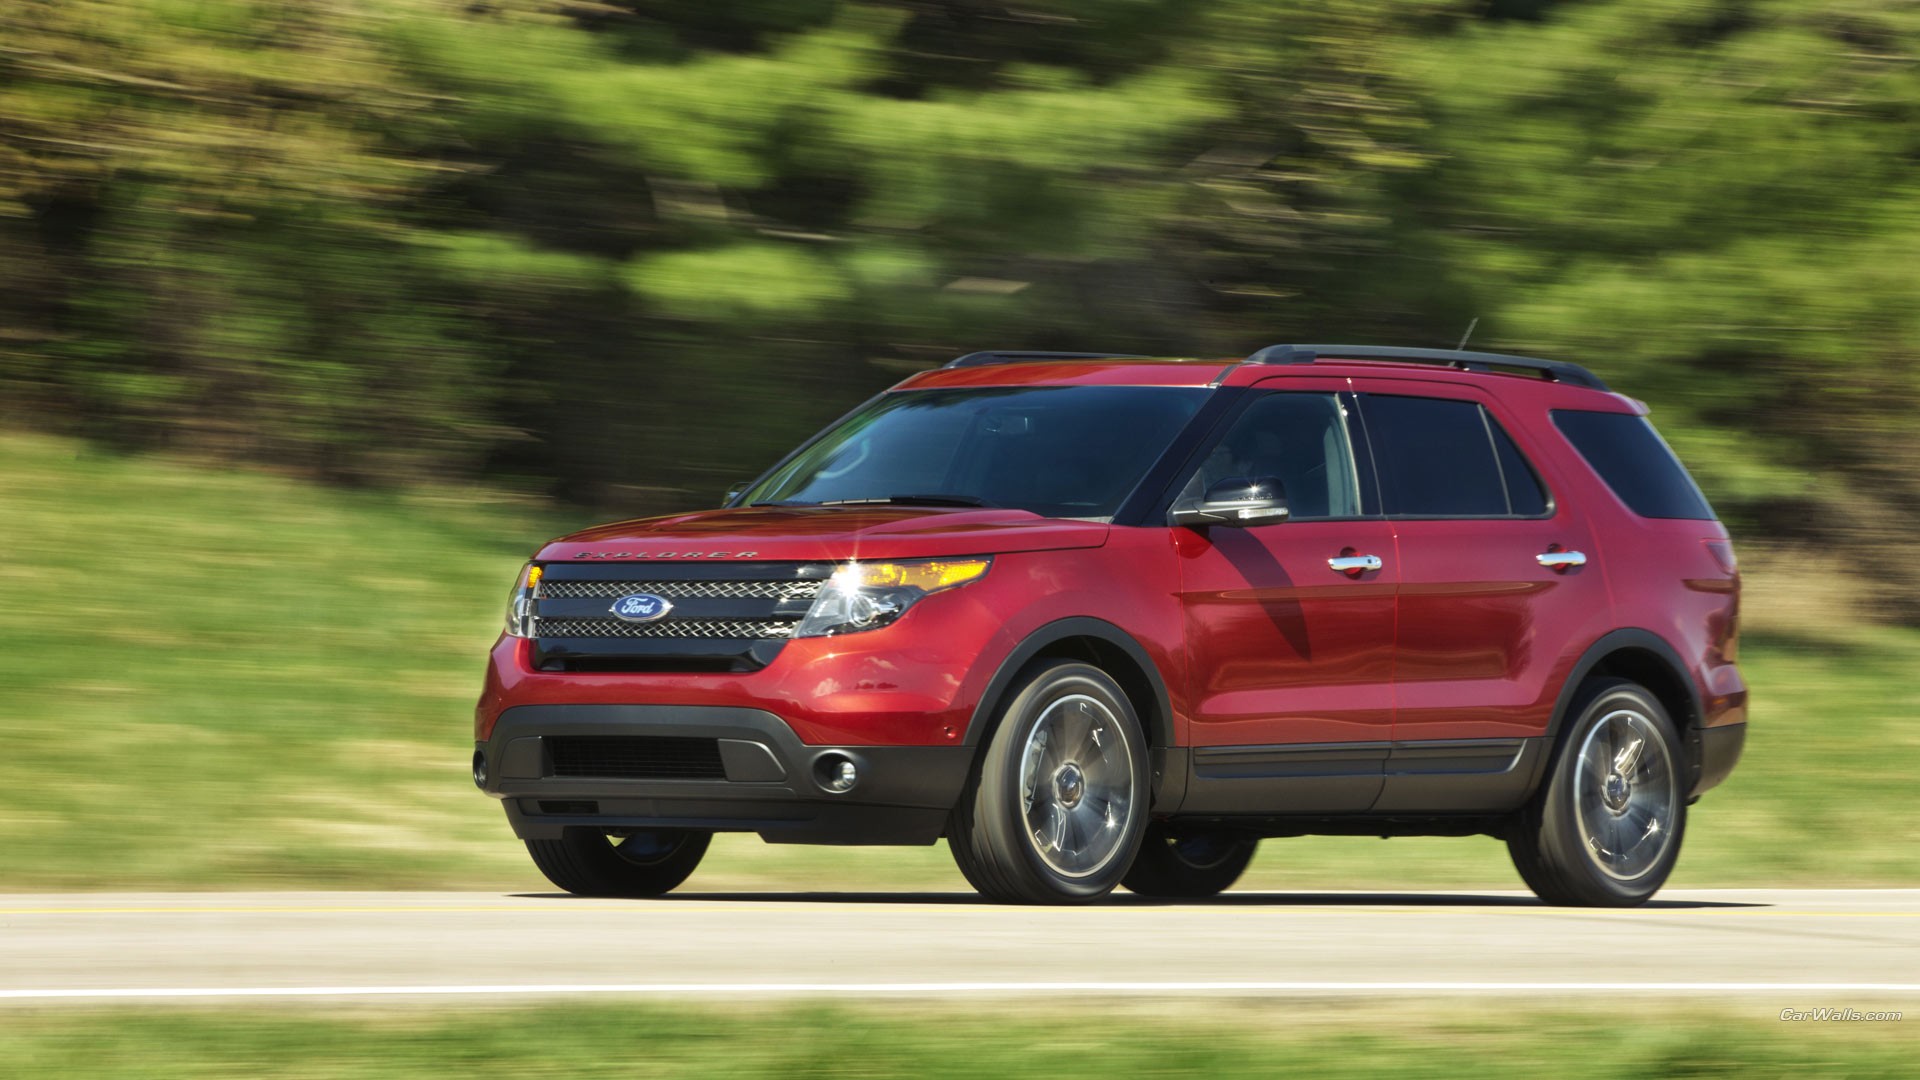 General 1920x1080 Ford Explorer car SUV Ford red cars vehicle American cars